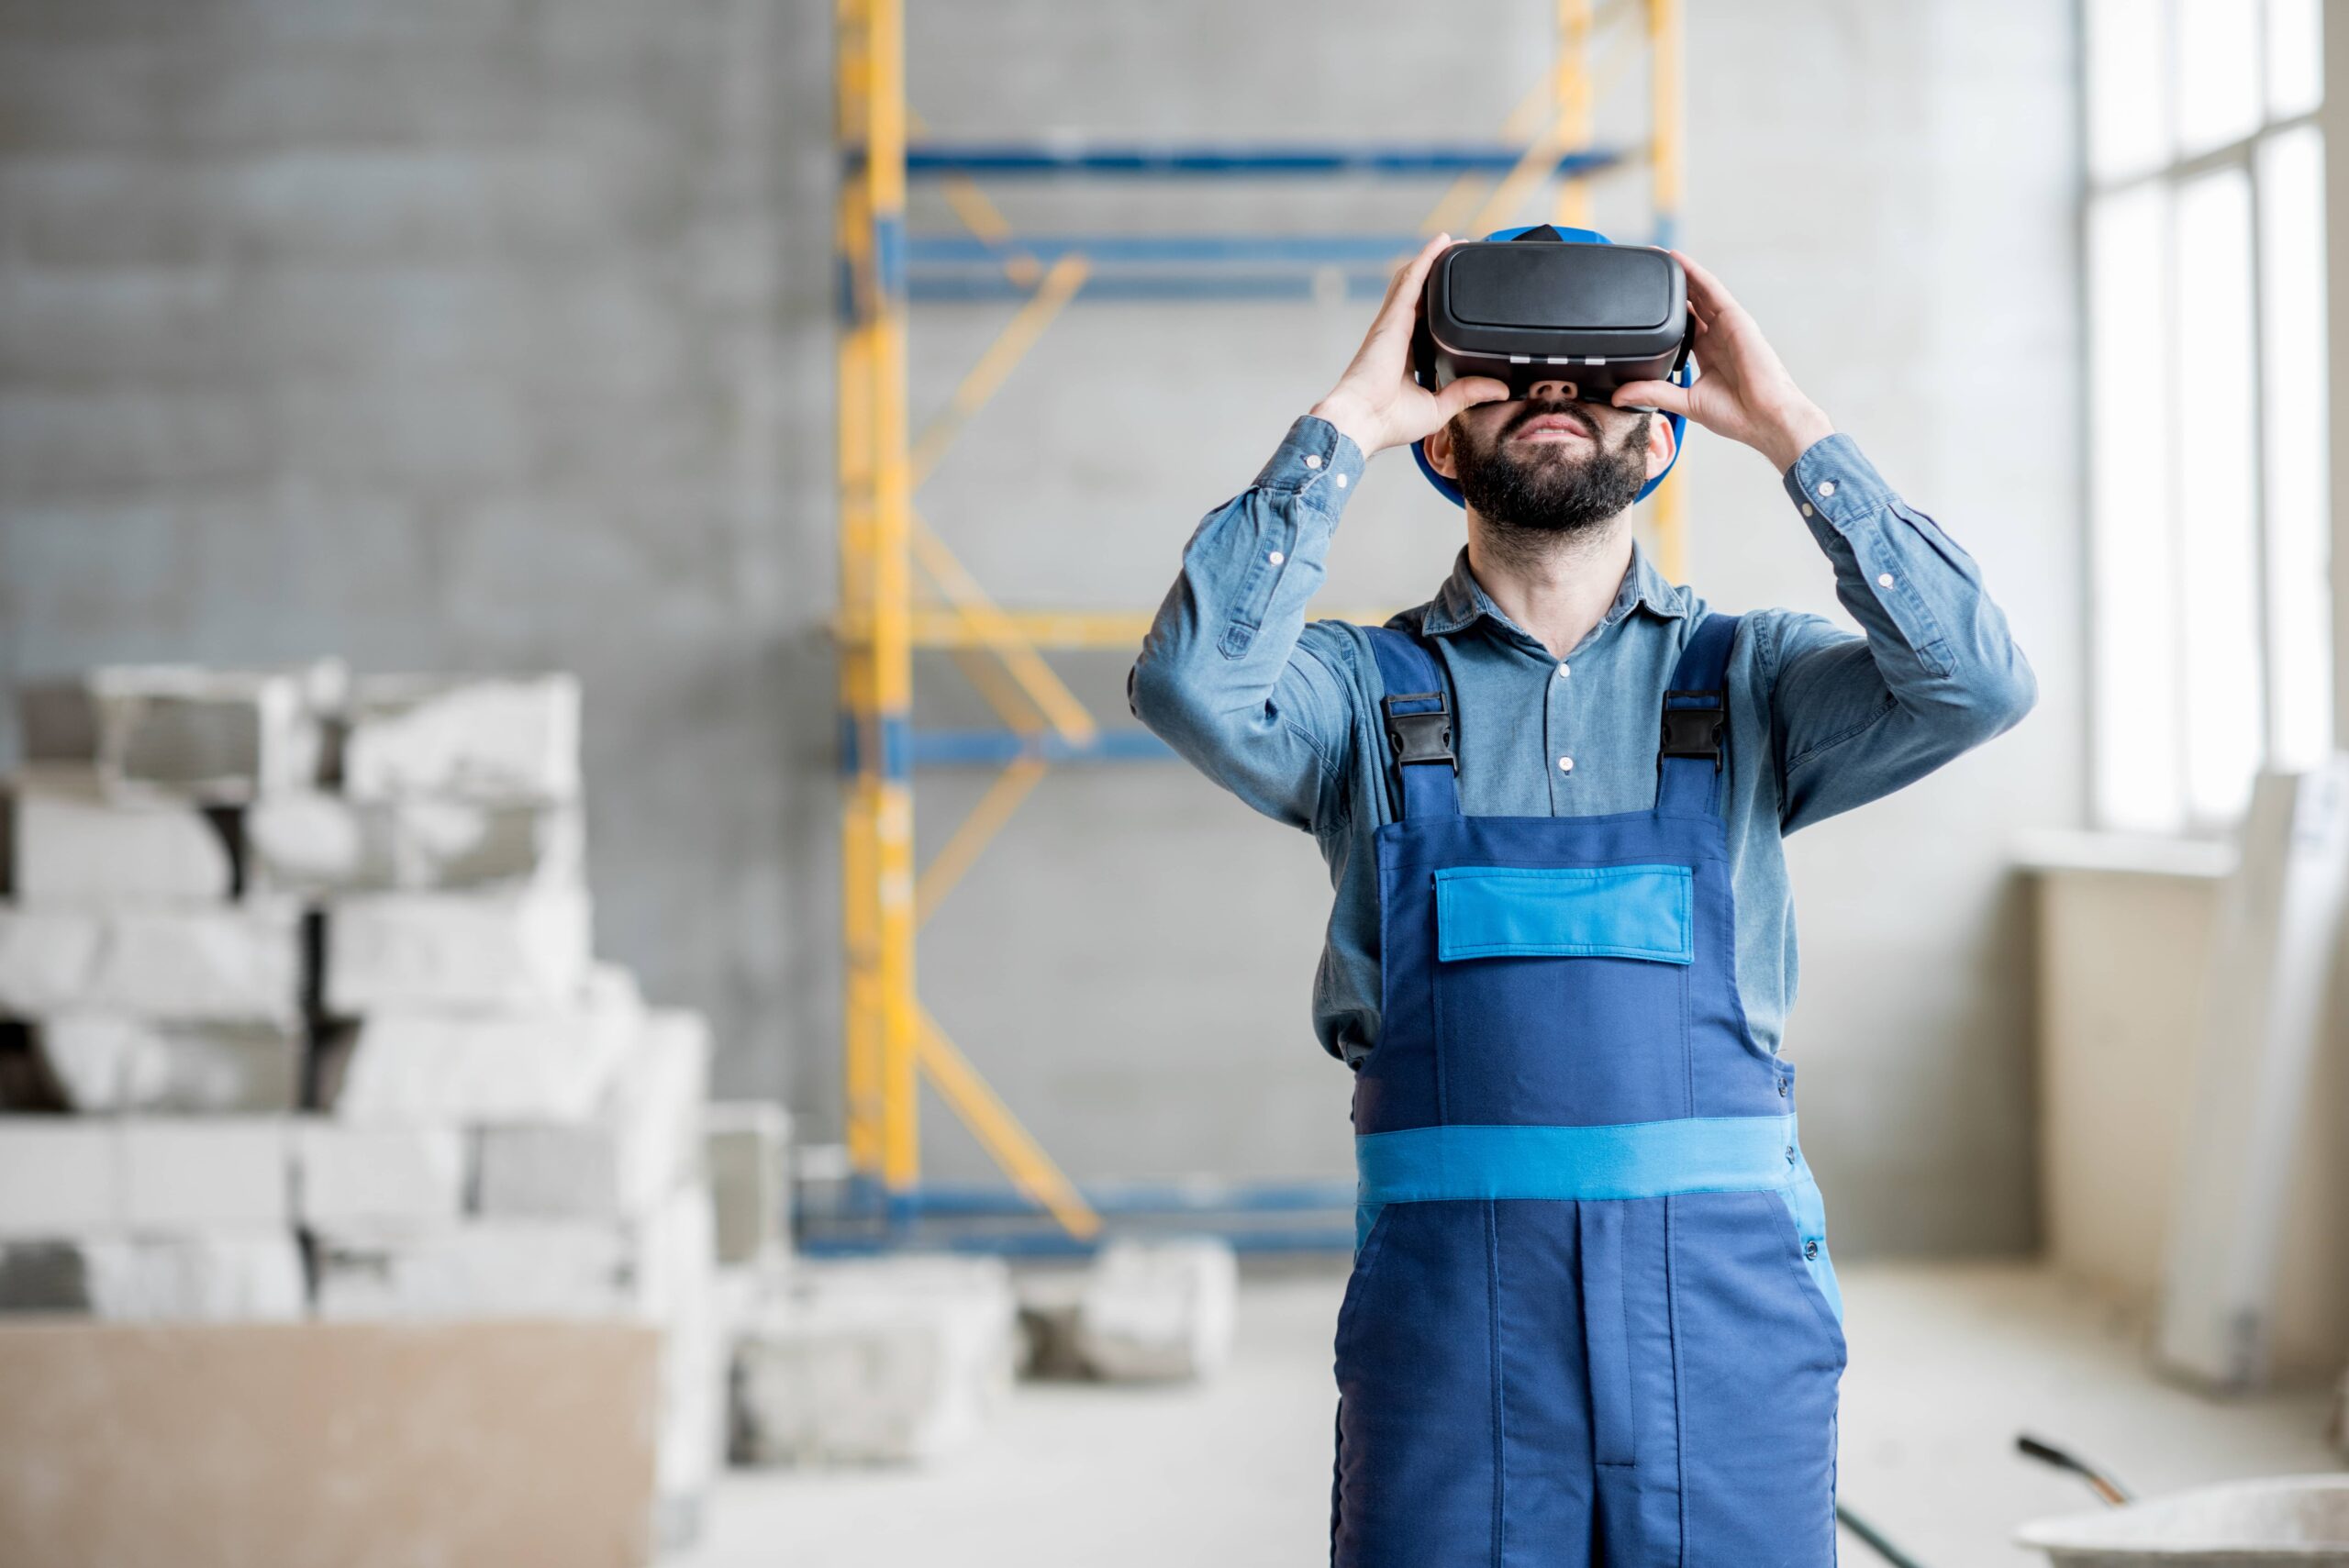 Virtual reality: what impact on training in the construction sector?